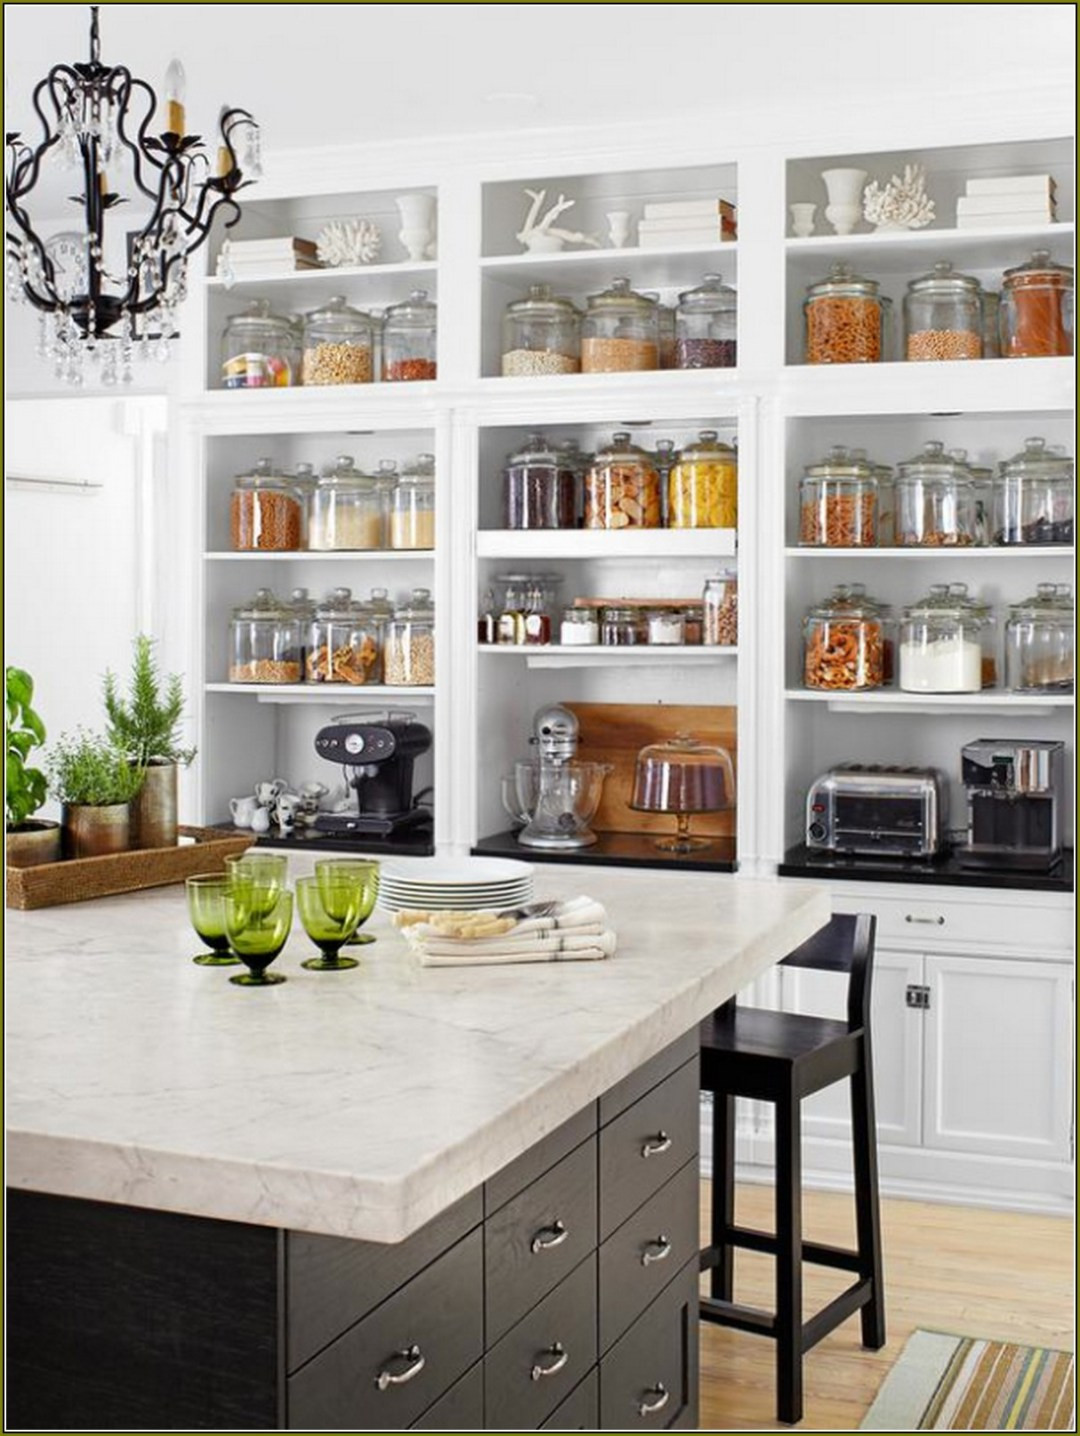 Organize Kitchen Cabinets
 The Easiest Way To Organize Your Kitchen Cabinets